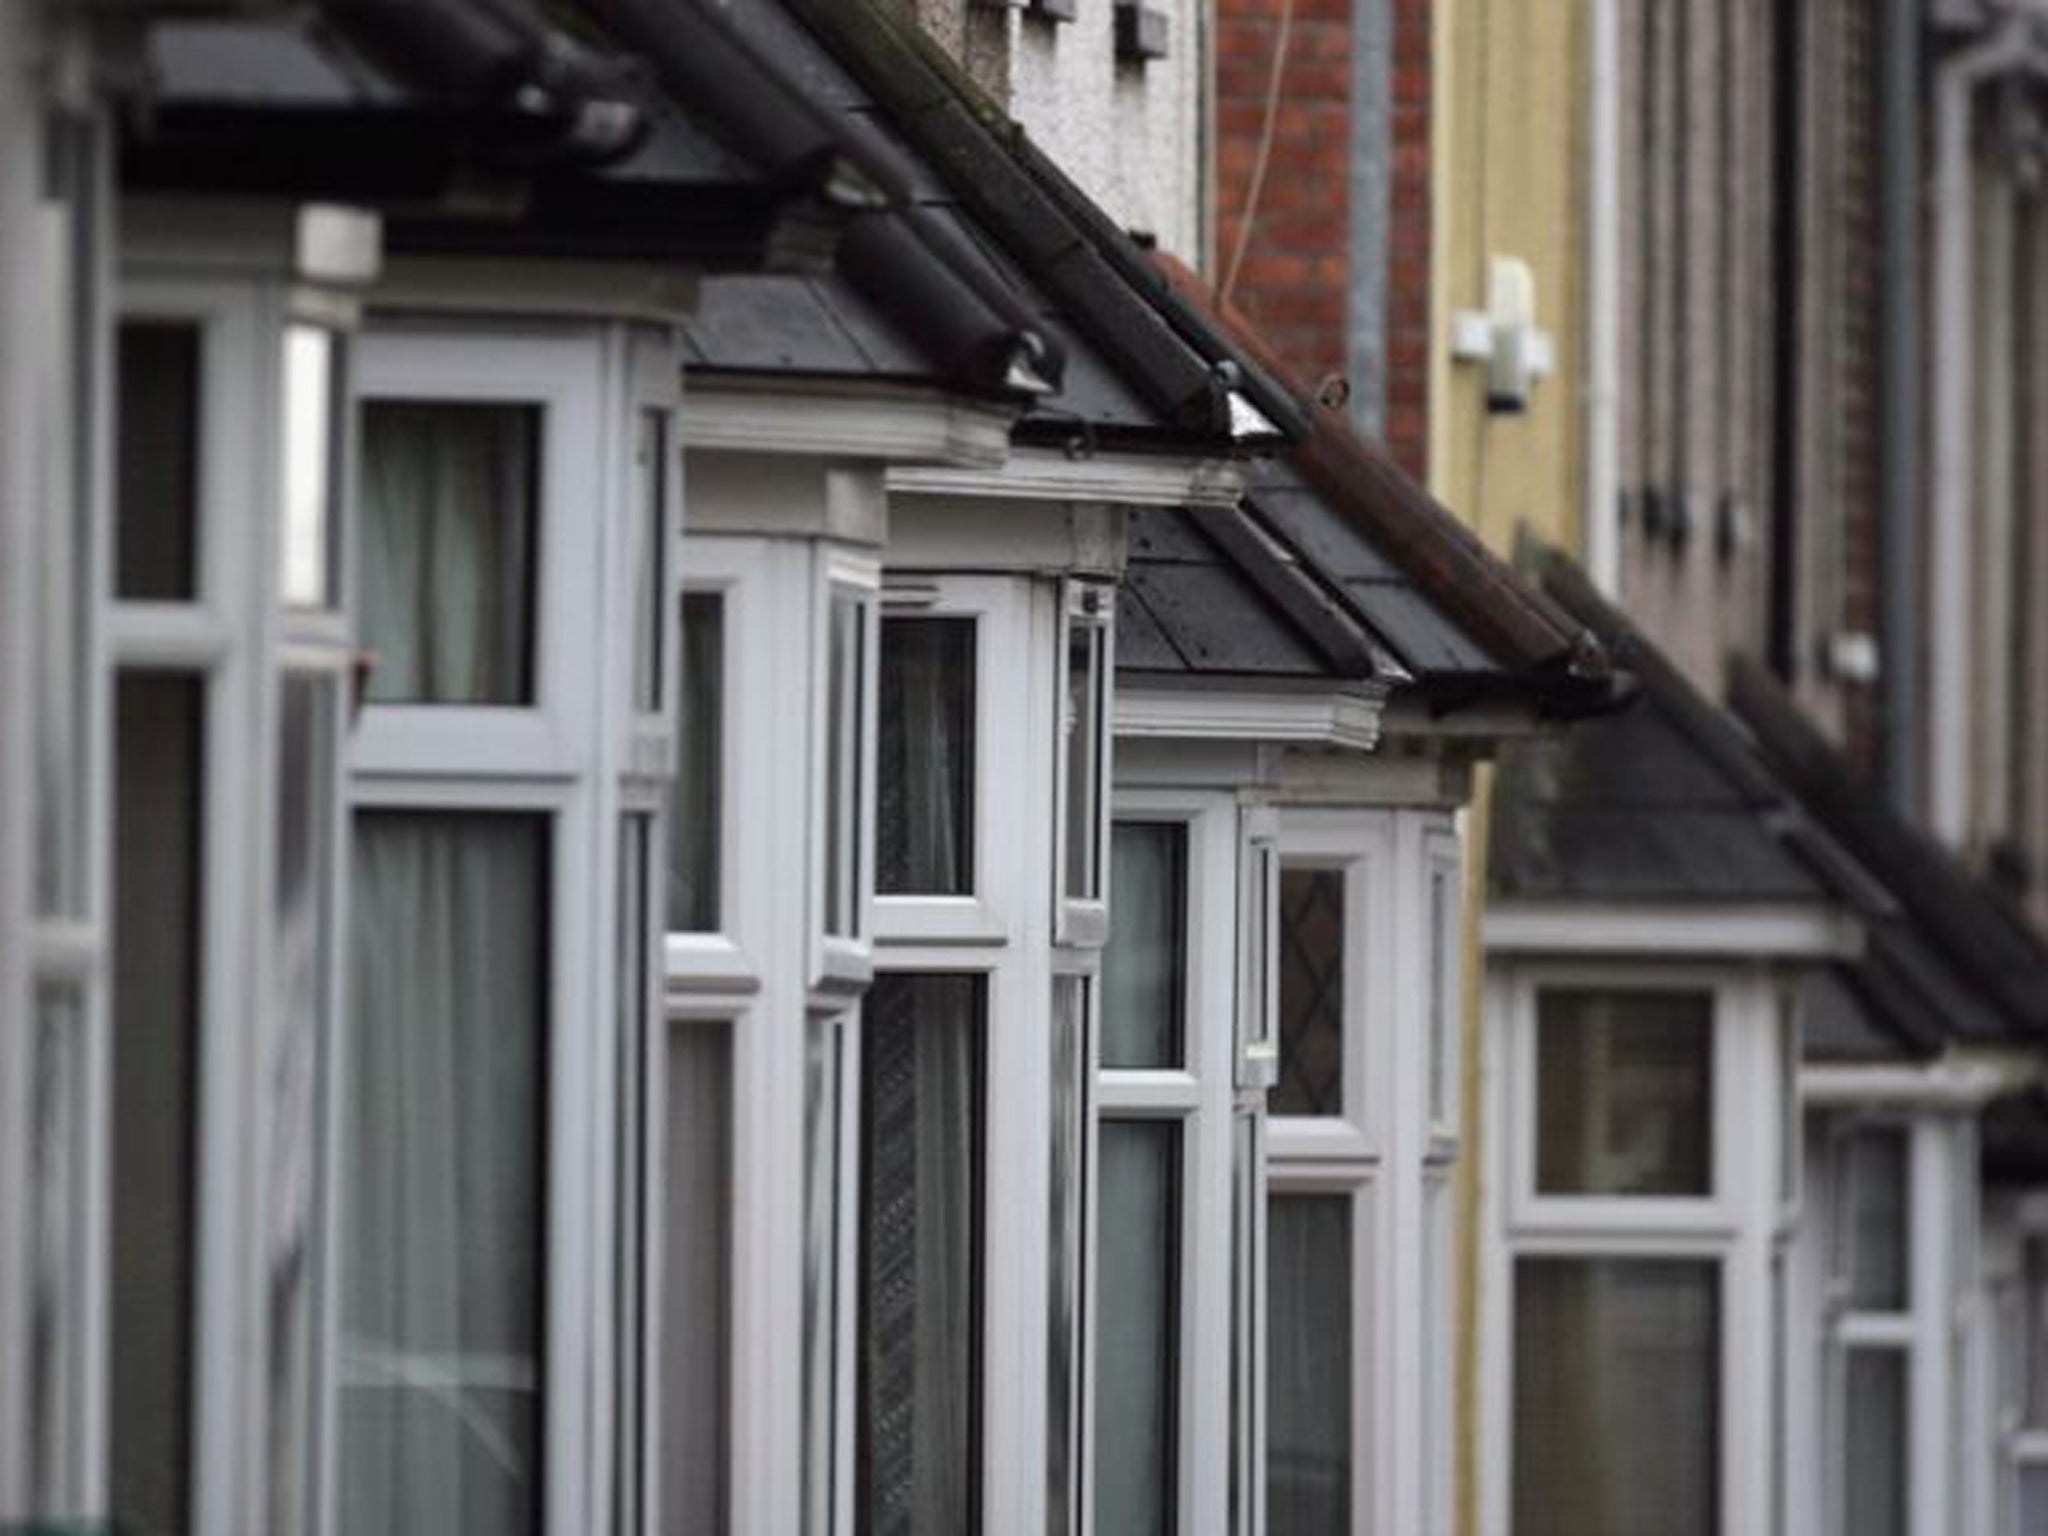 House prices have recorded their fastest growth in almost three years